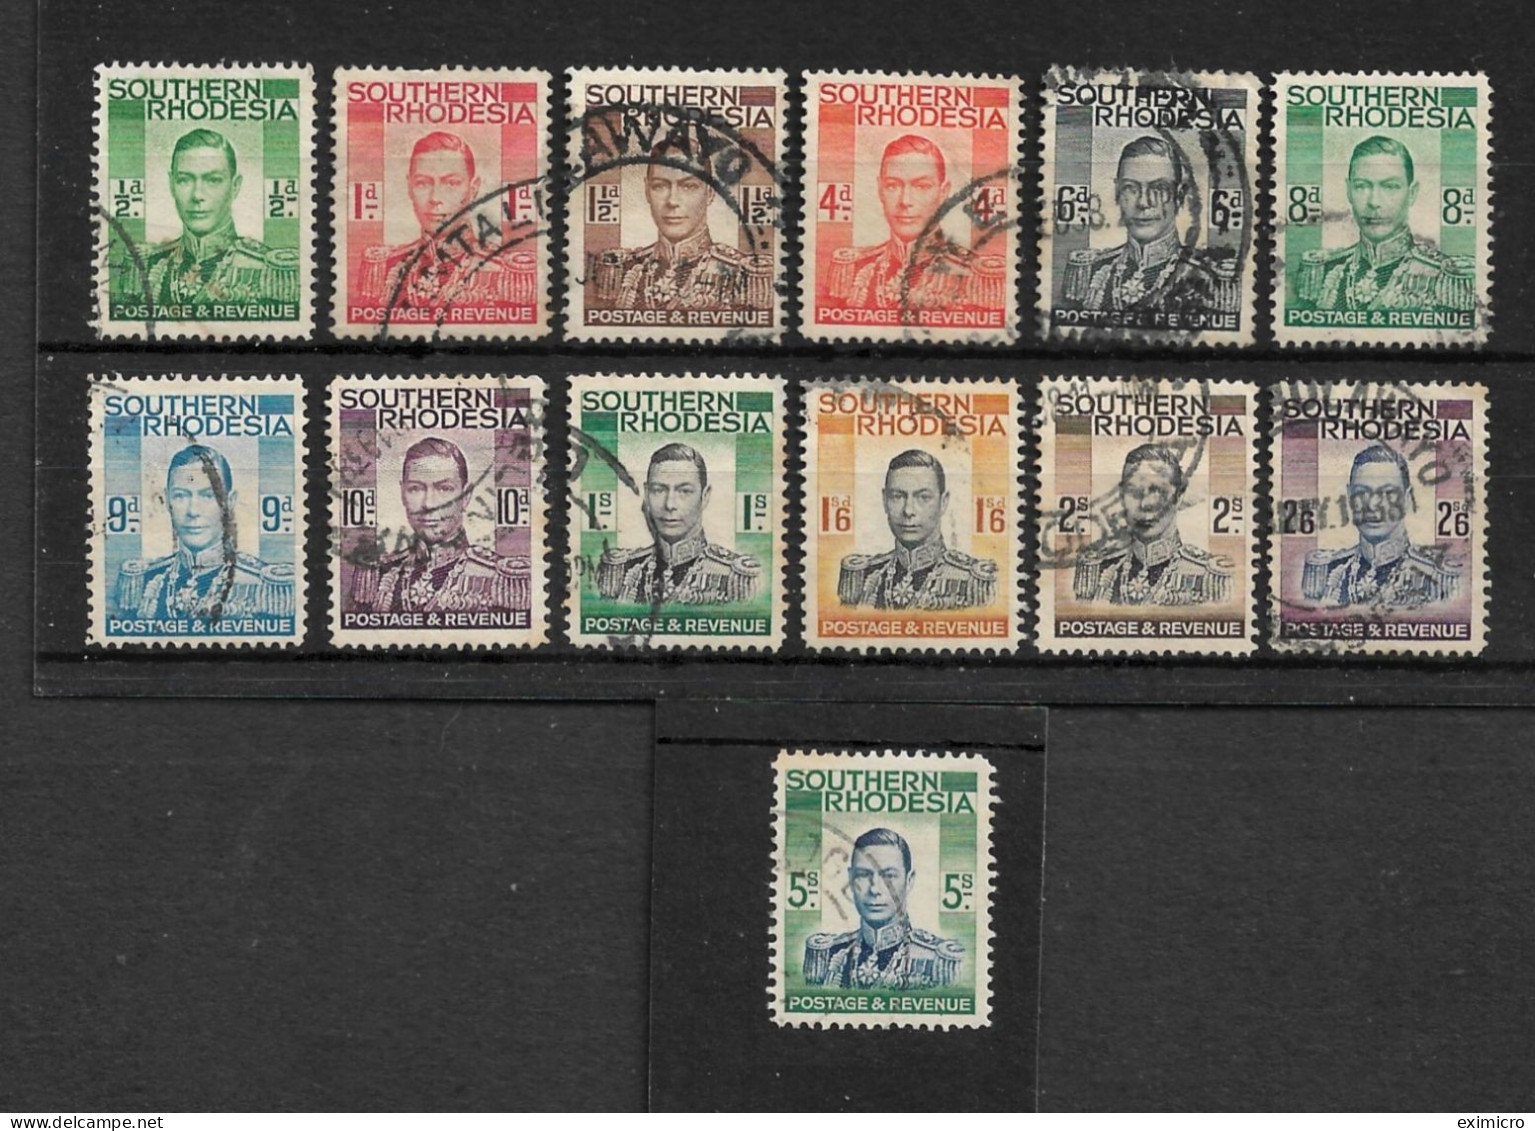 SOUTHERN RHODESIA 1937 SET SG 40/52 FINE USED Cat £26 - Southern Rhodesia (...-1964)